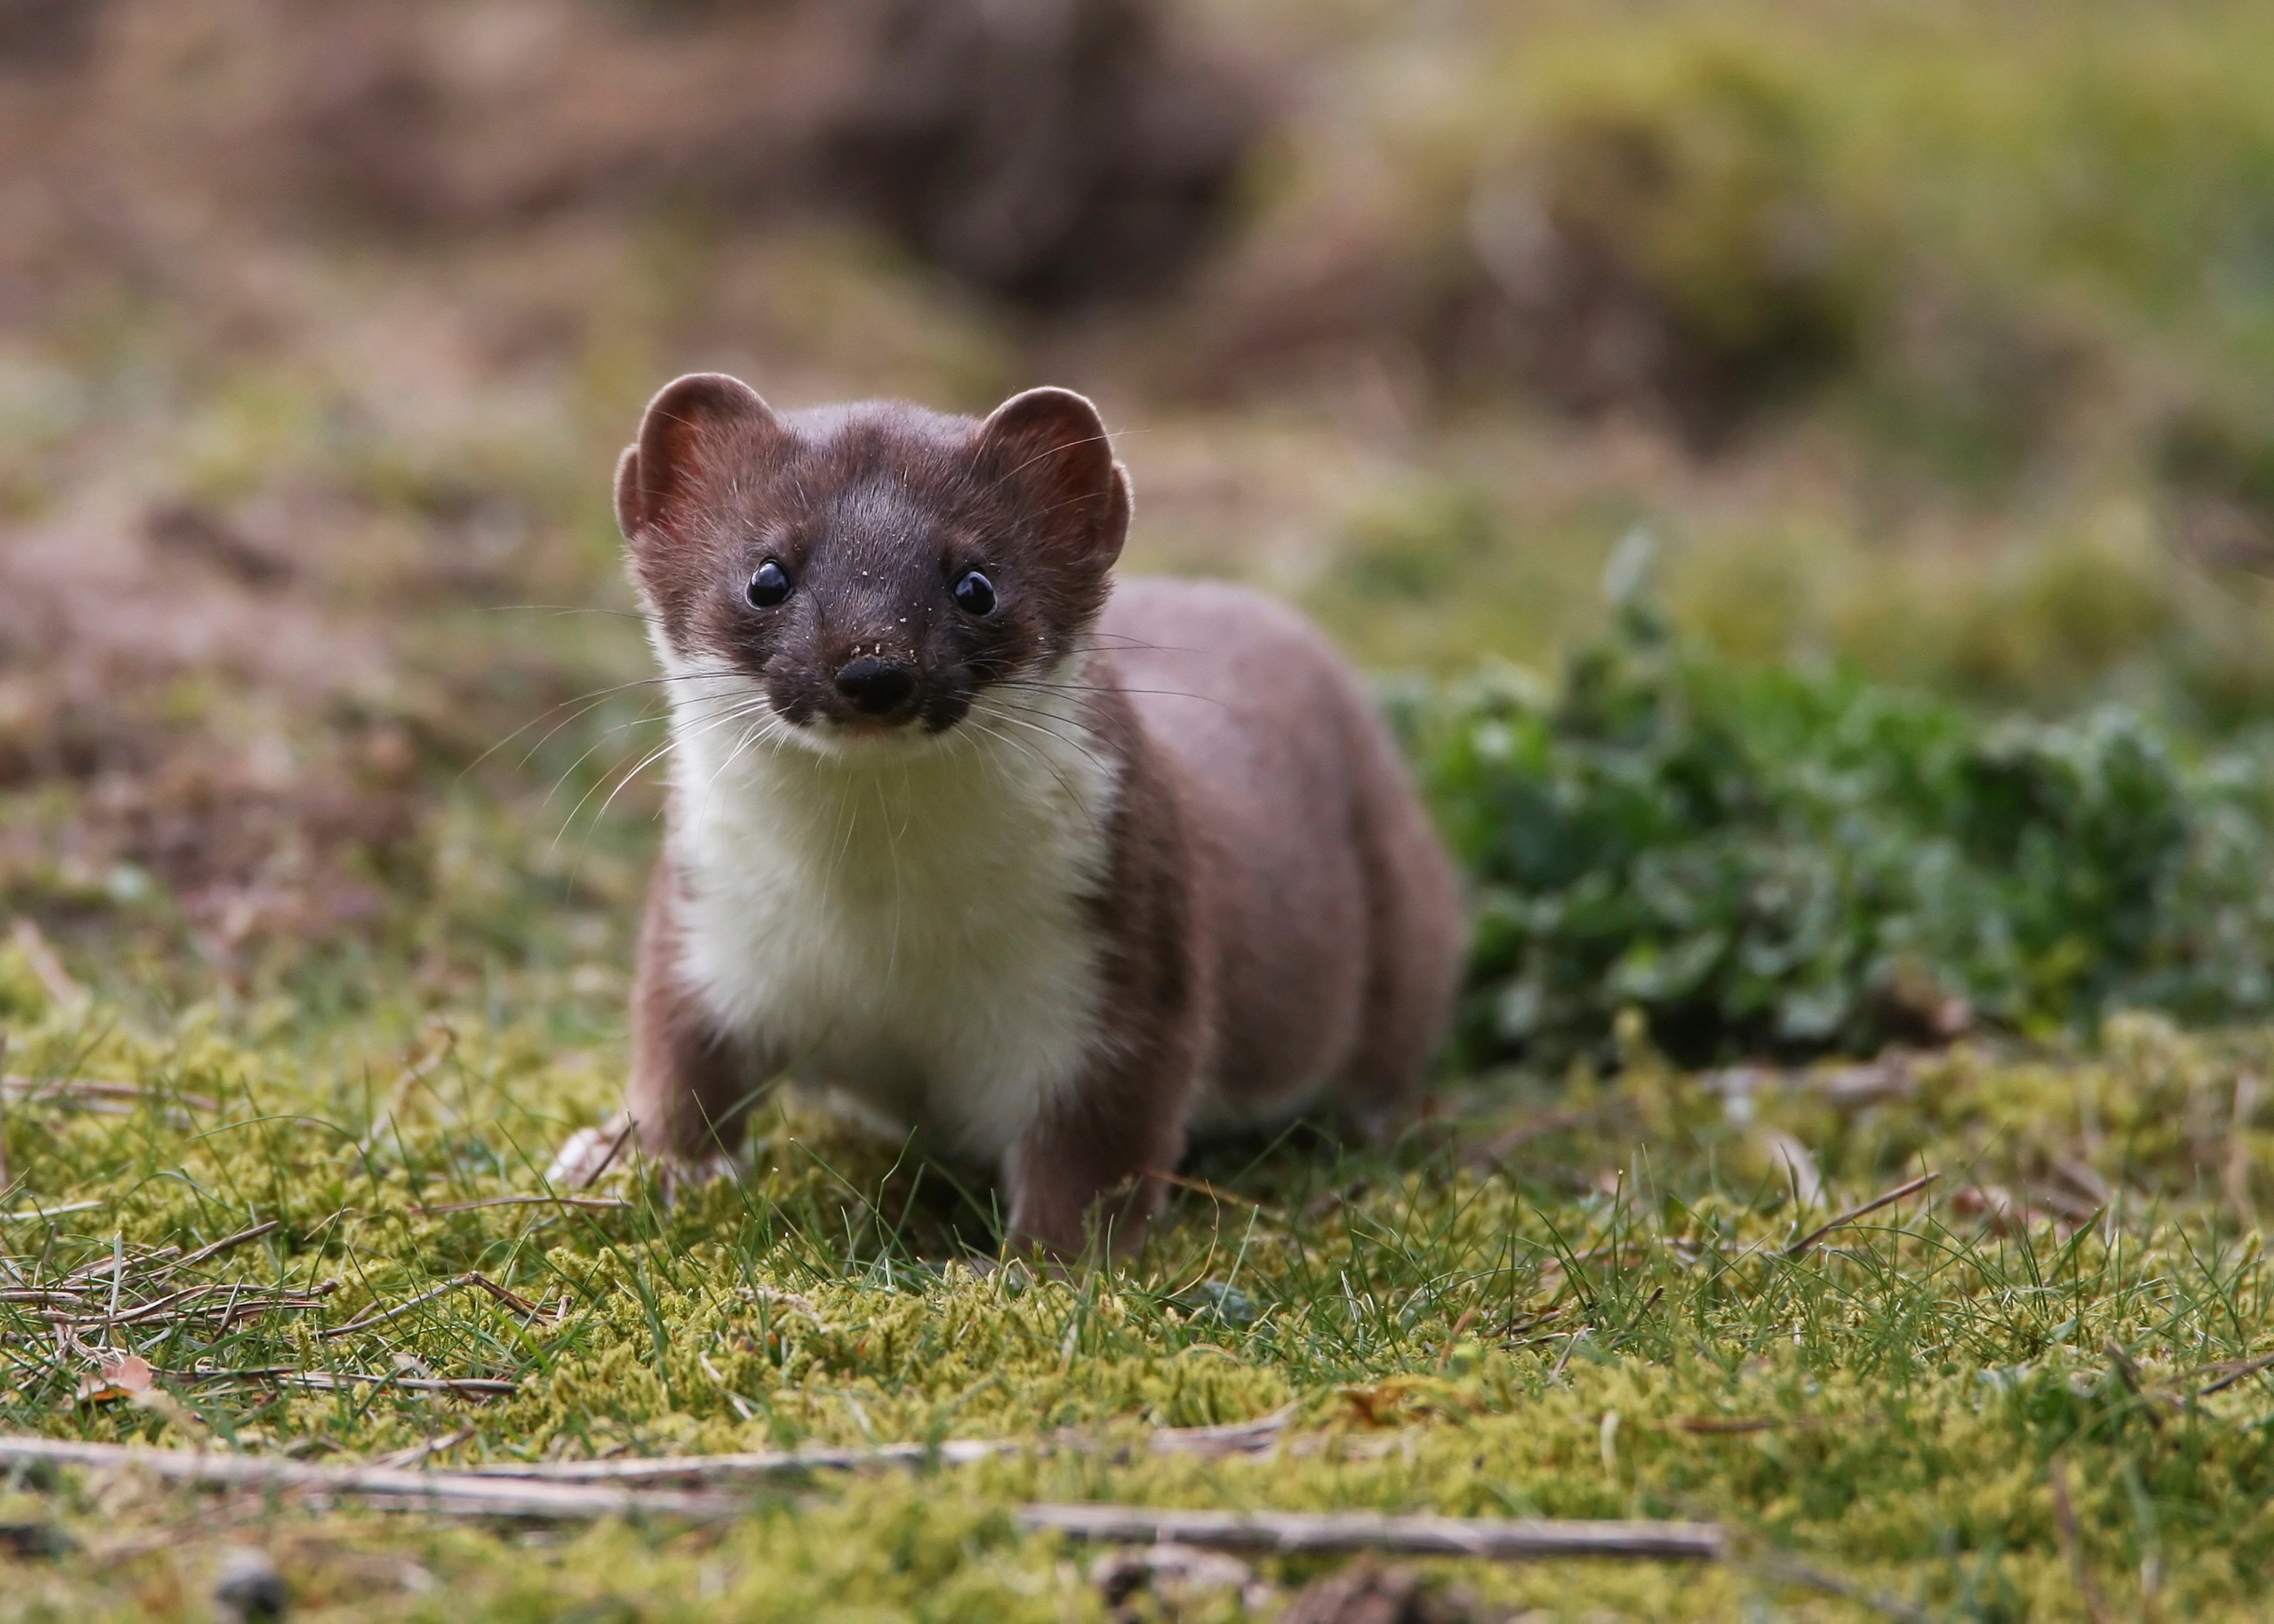 A cull aims to protect the island’s wildlife for future generations – with Orkney’s nature highlighted as one of main attractions for visiting tourists, who generate over £30 million a year to the local economy.